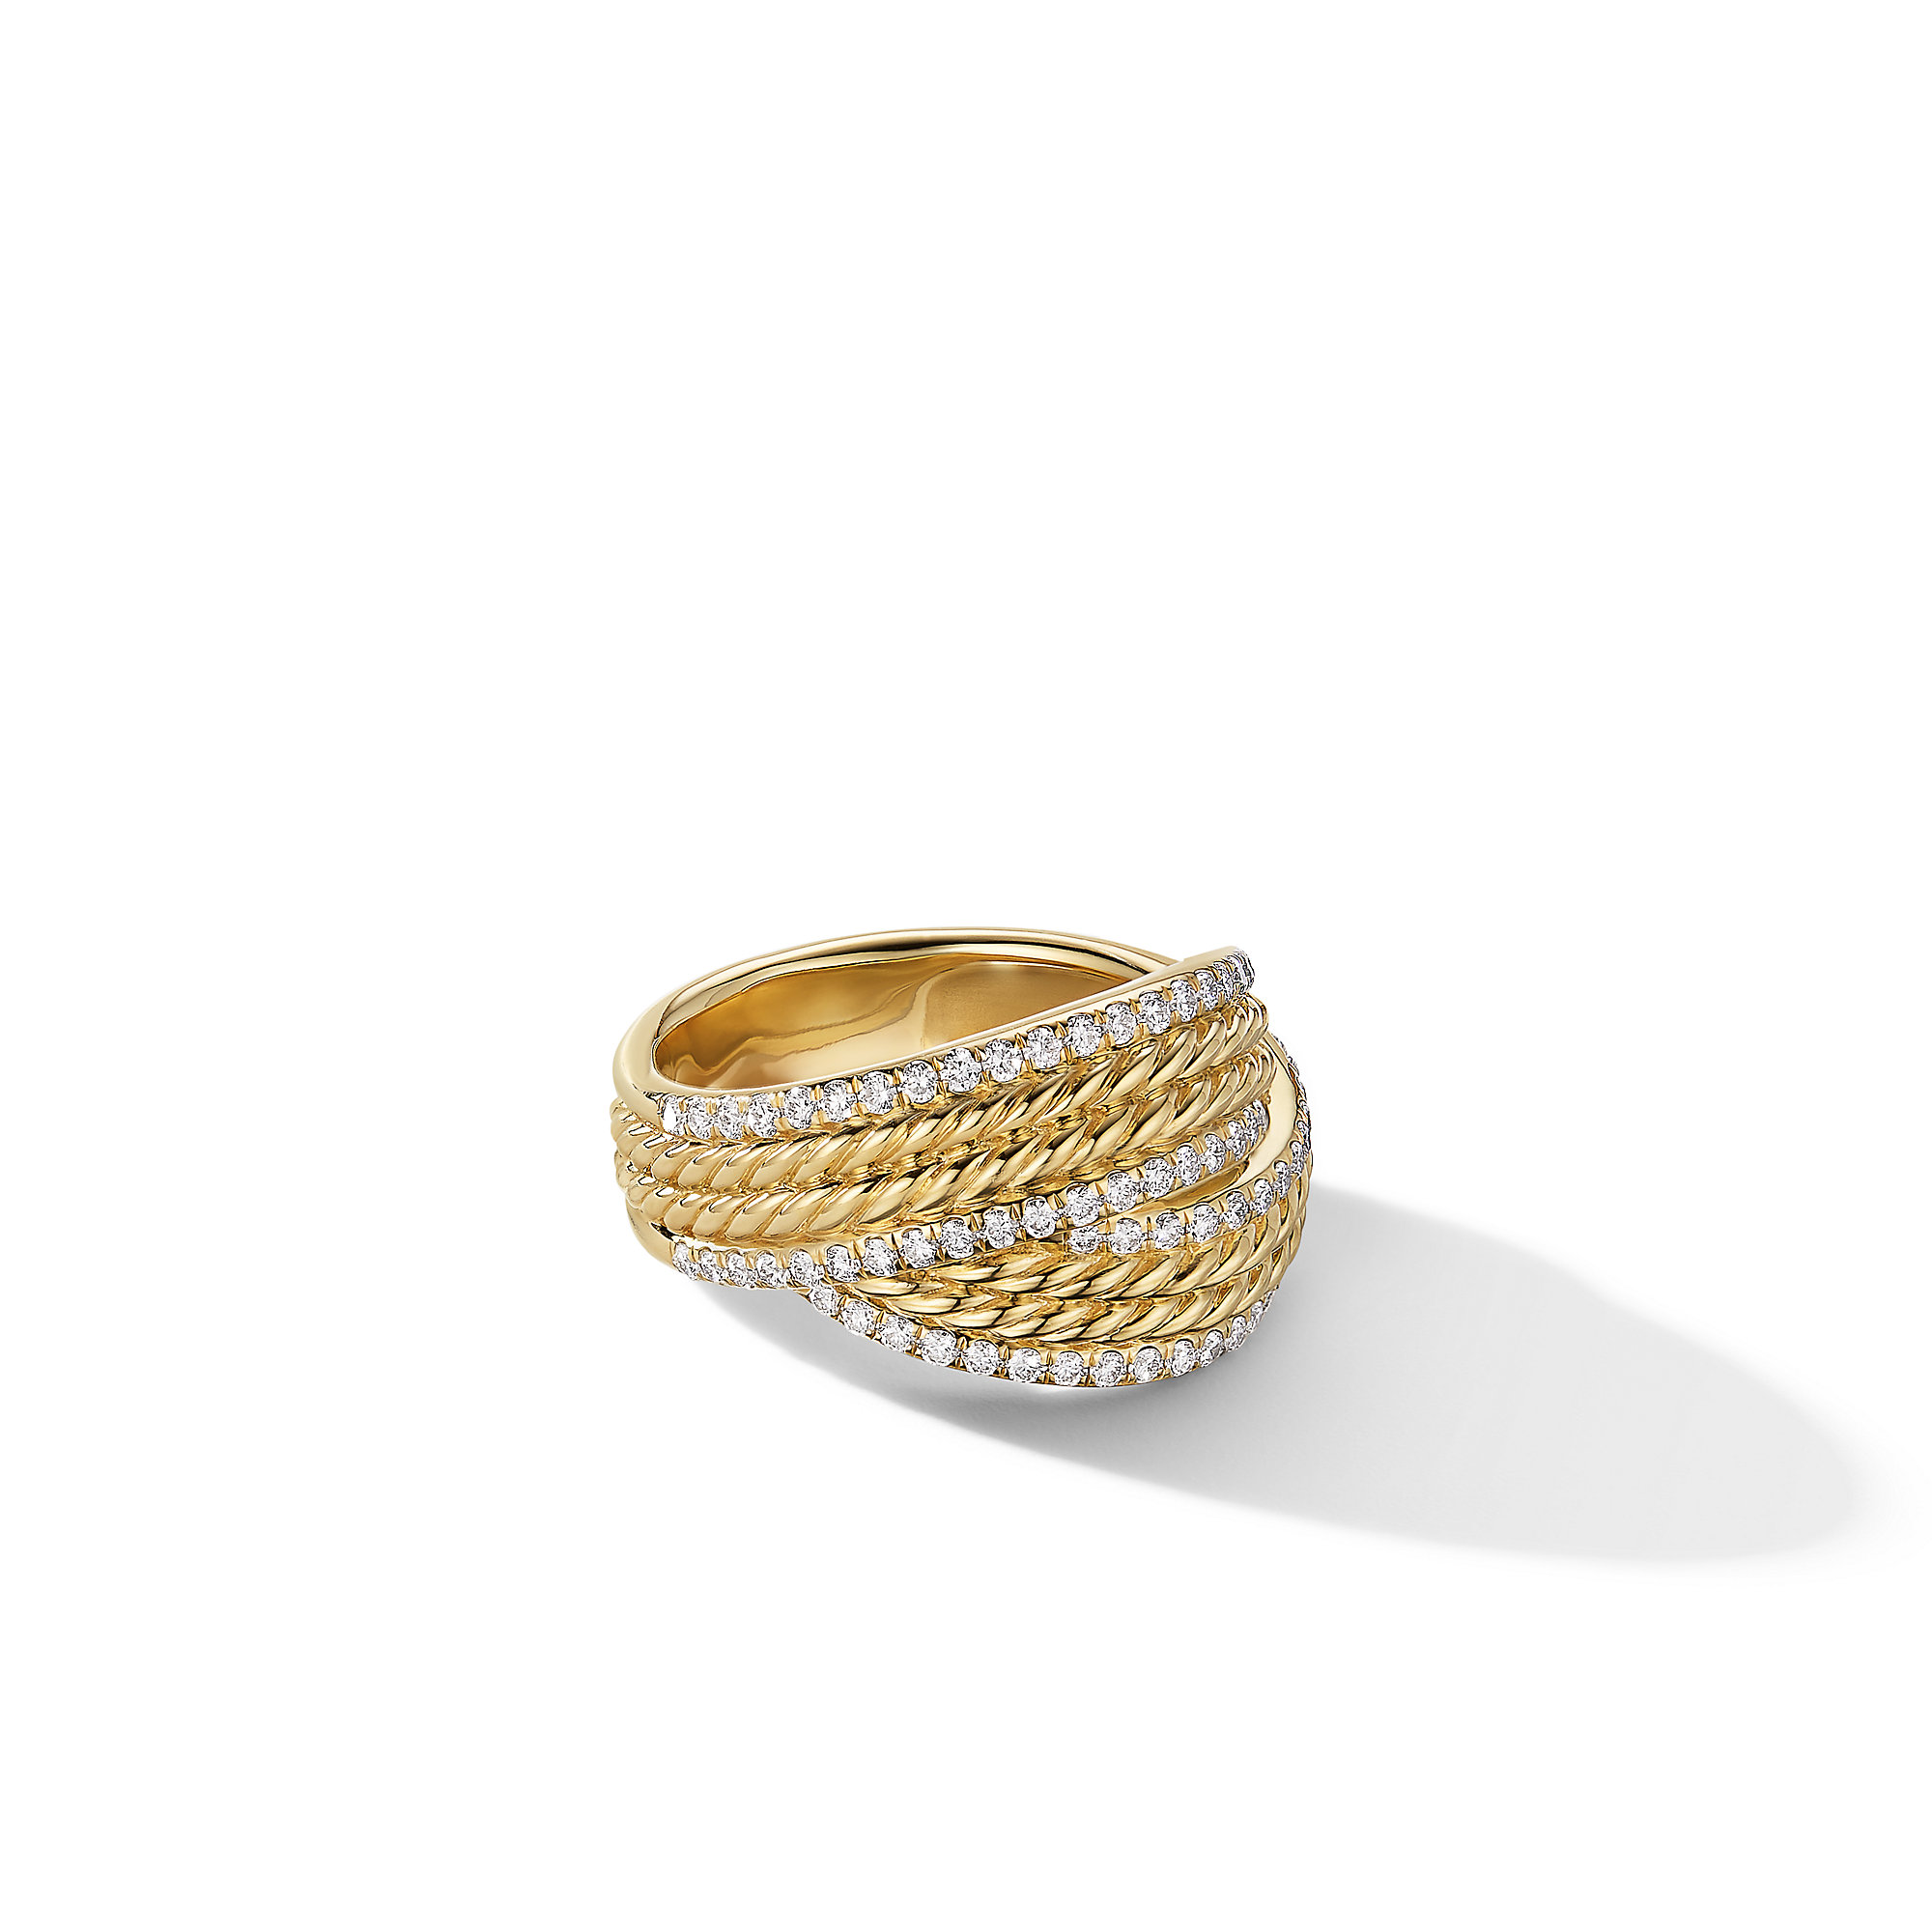 DY Origami Ring in 18K Yellow Gold with Diamonds, 13mm